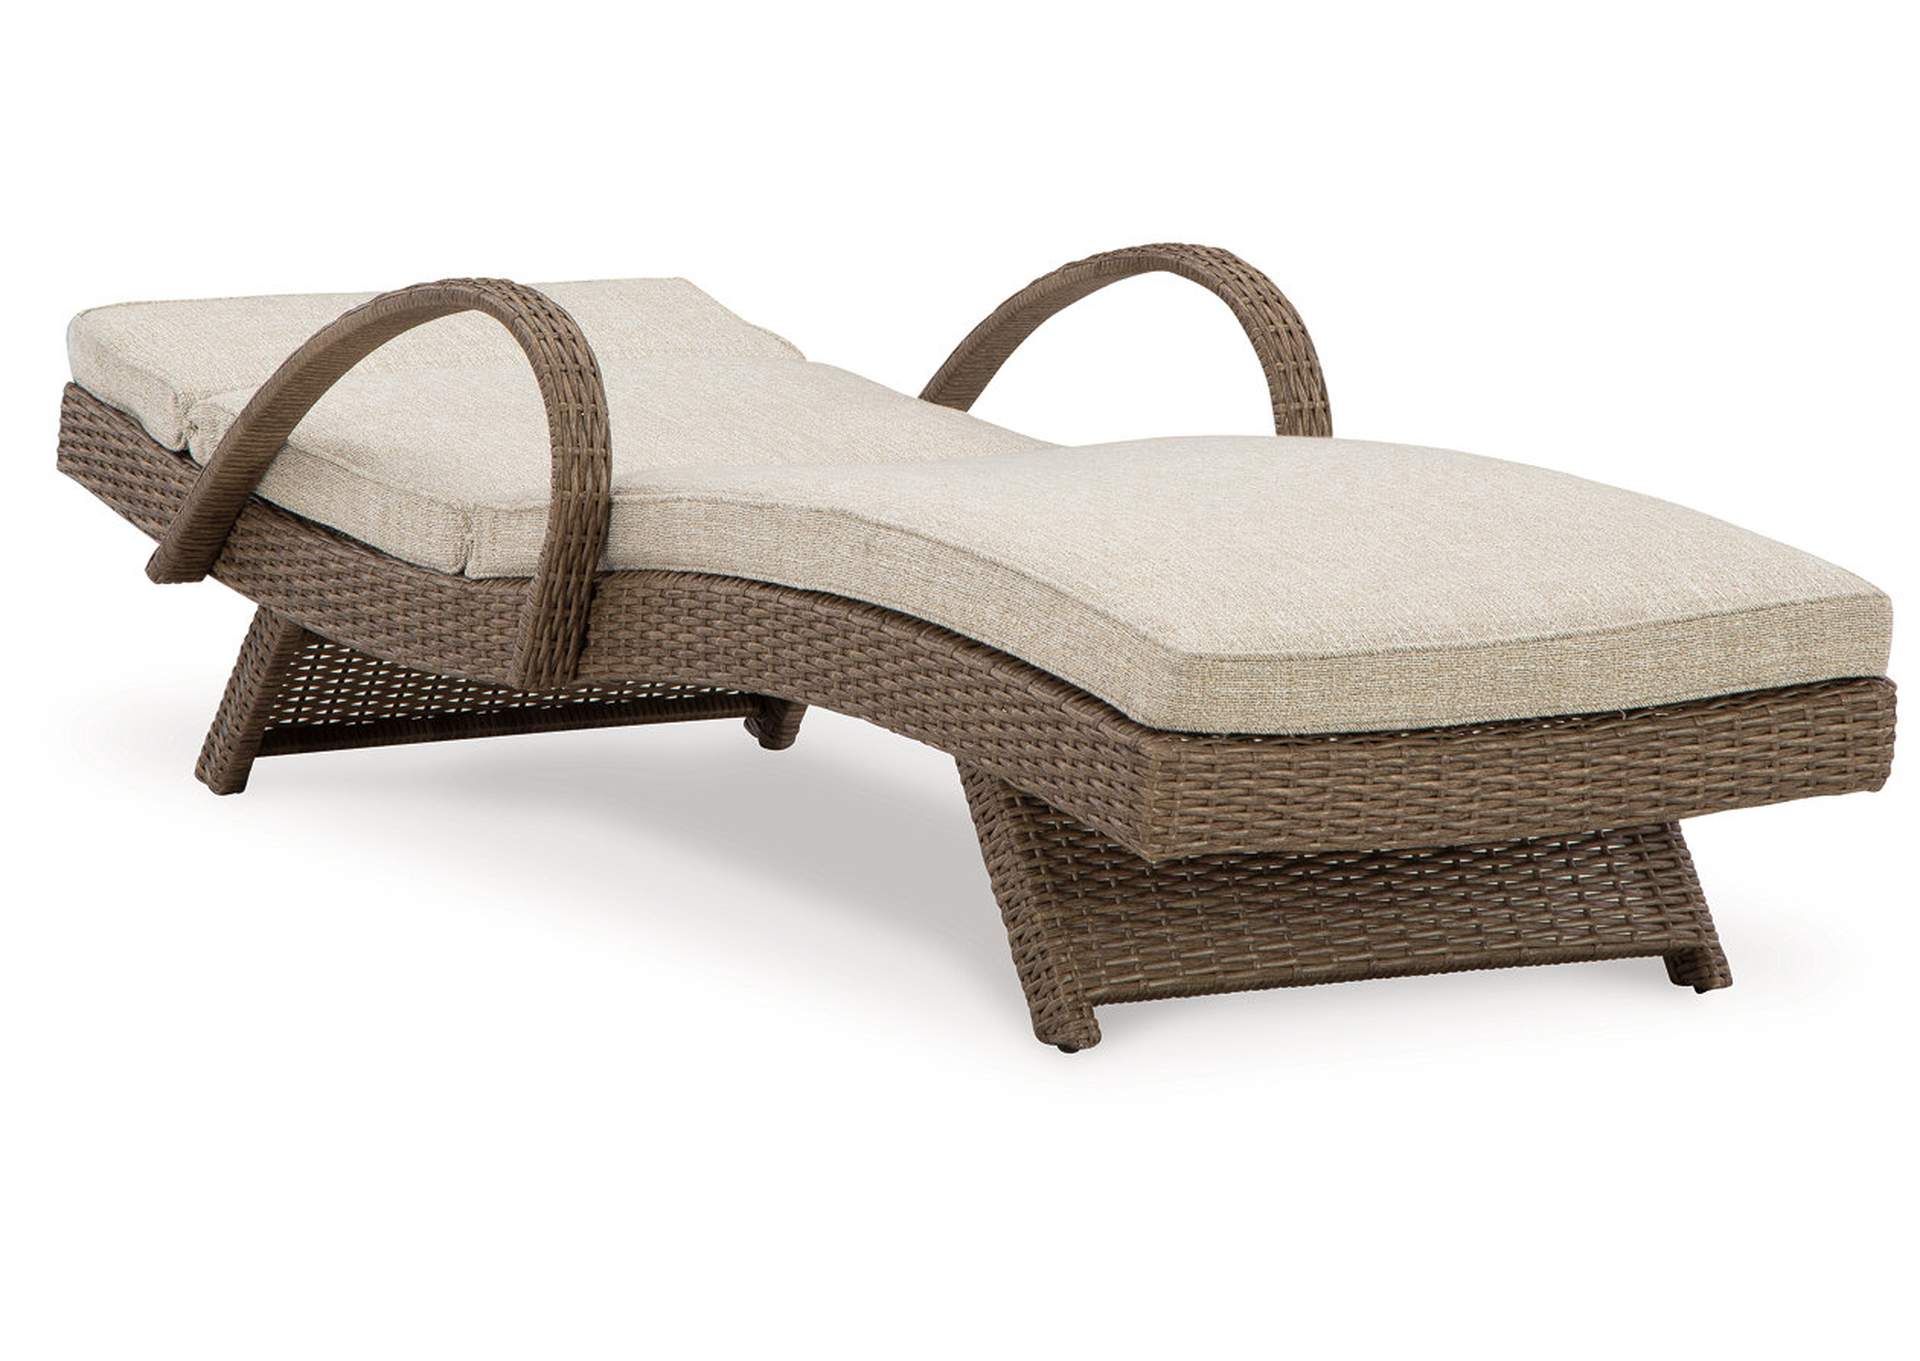 Beachcroft Outdoor Chaise Lounge with Cushion,Outdoor By Ashley